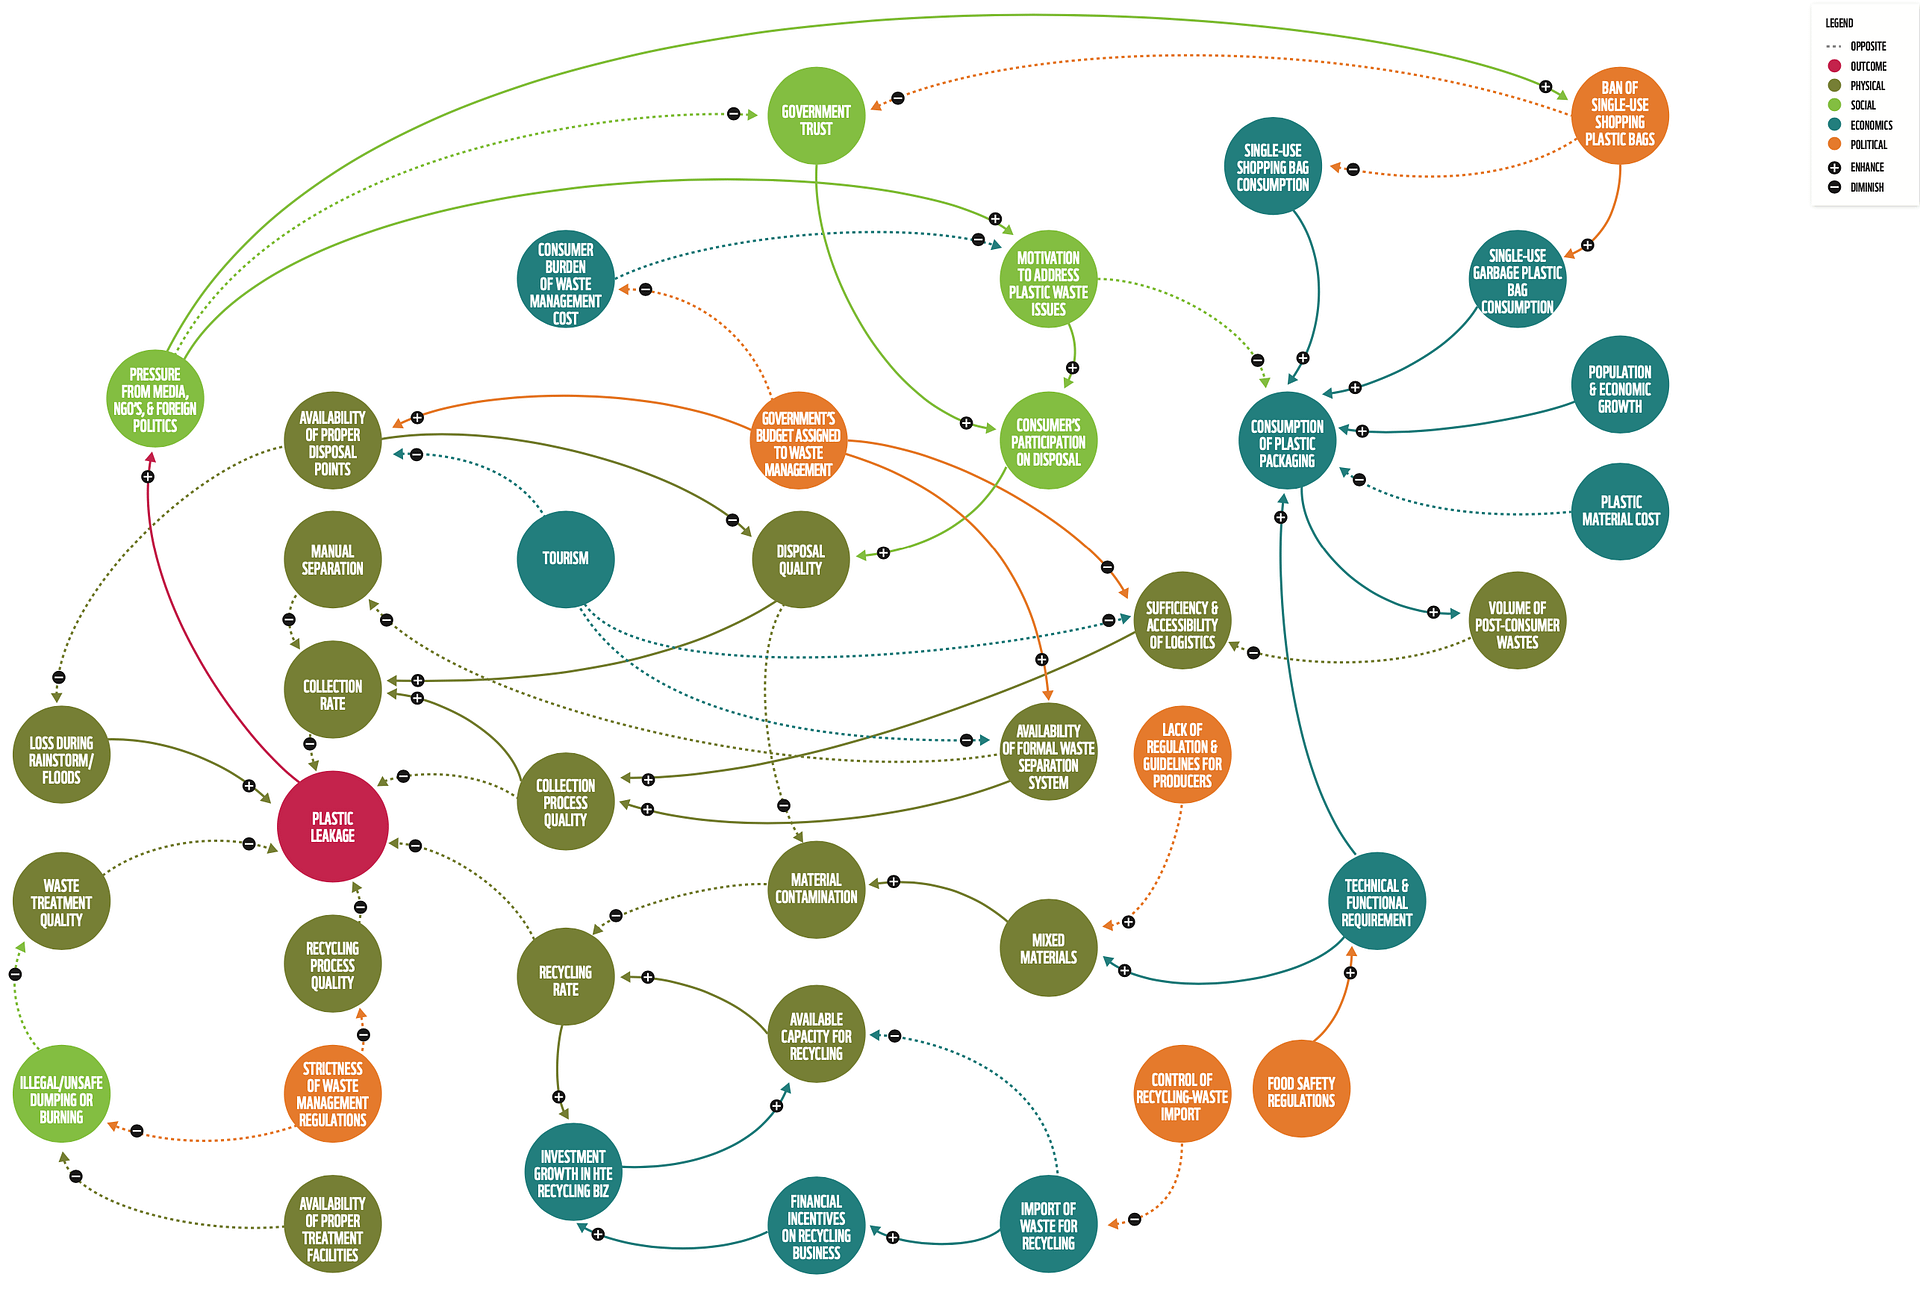 The plastic waste crisis is a systemic issue that stems from a variety of root causes, including political, economic, social, infrastructural, commercial, and design. This systems map shows how complex the underlying root causes of plastic waste can be and how seemingly unrelated factors result in increased plastic waste and litter.